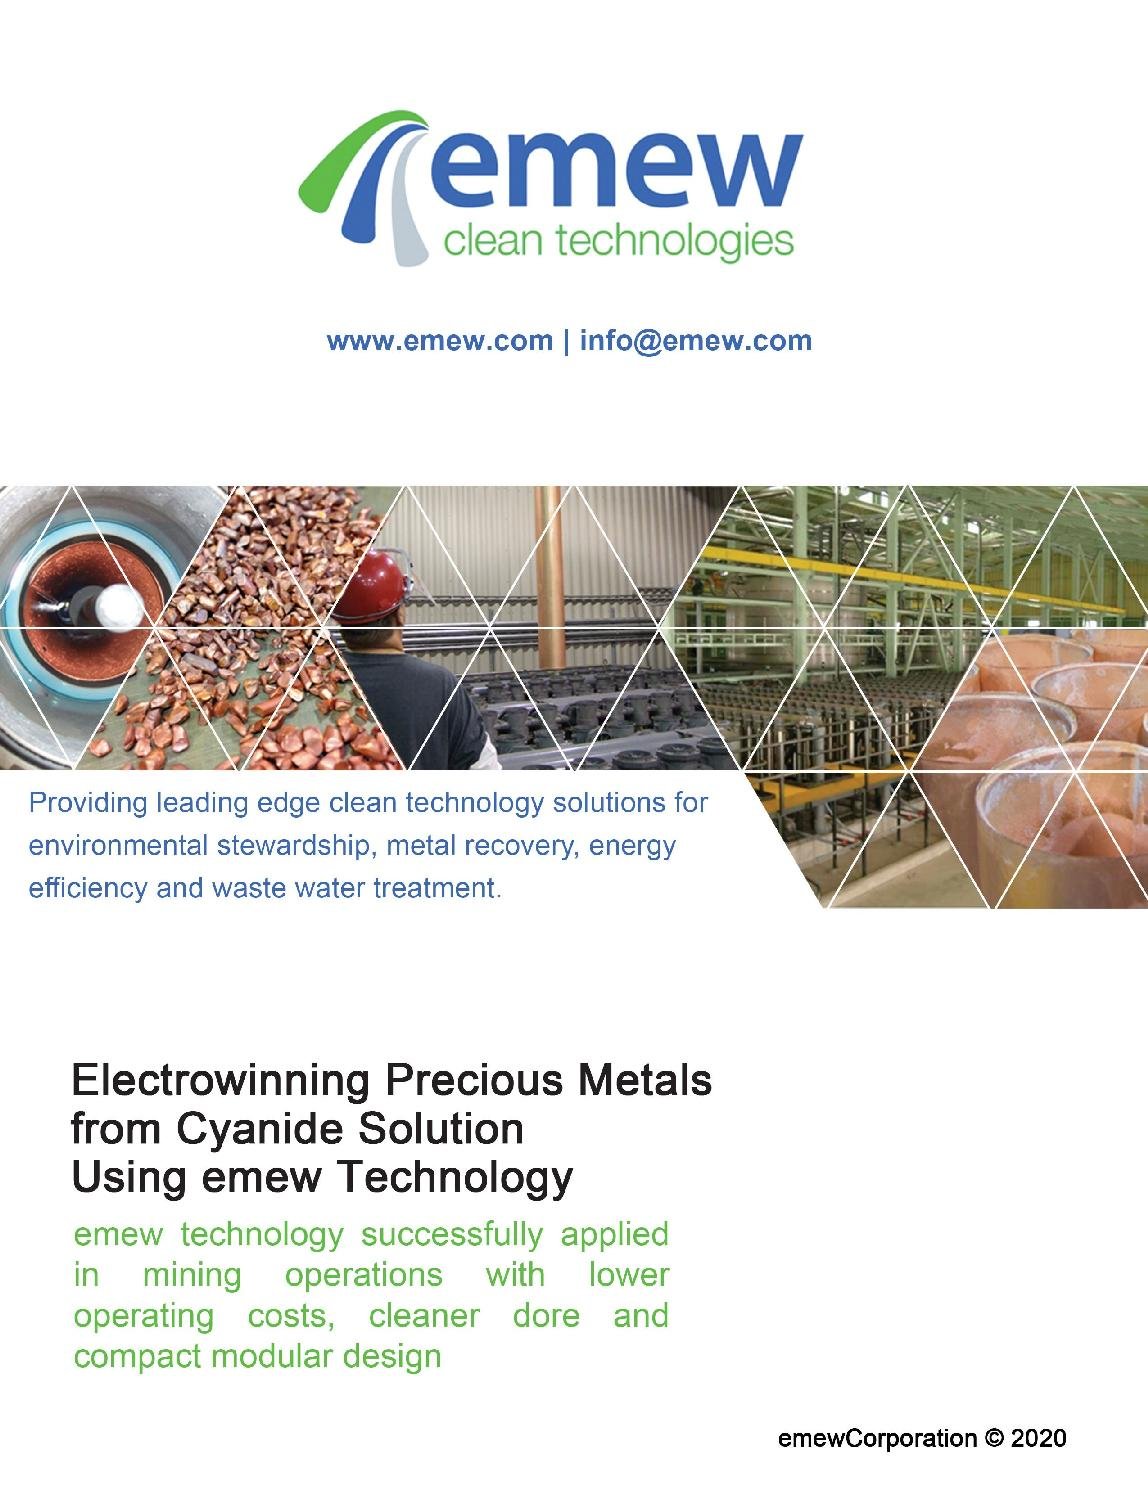 Electrowinning Precious Metals from Cyanide Solution using emew Technology